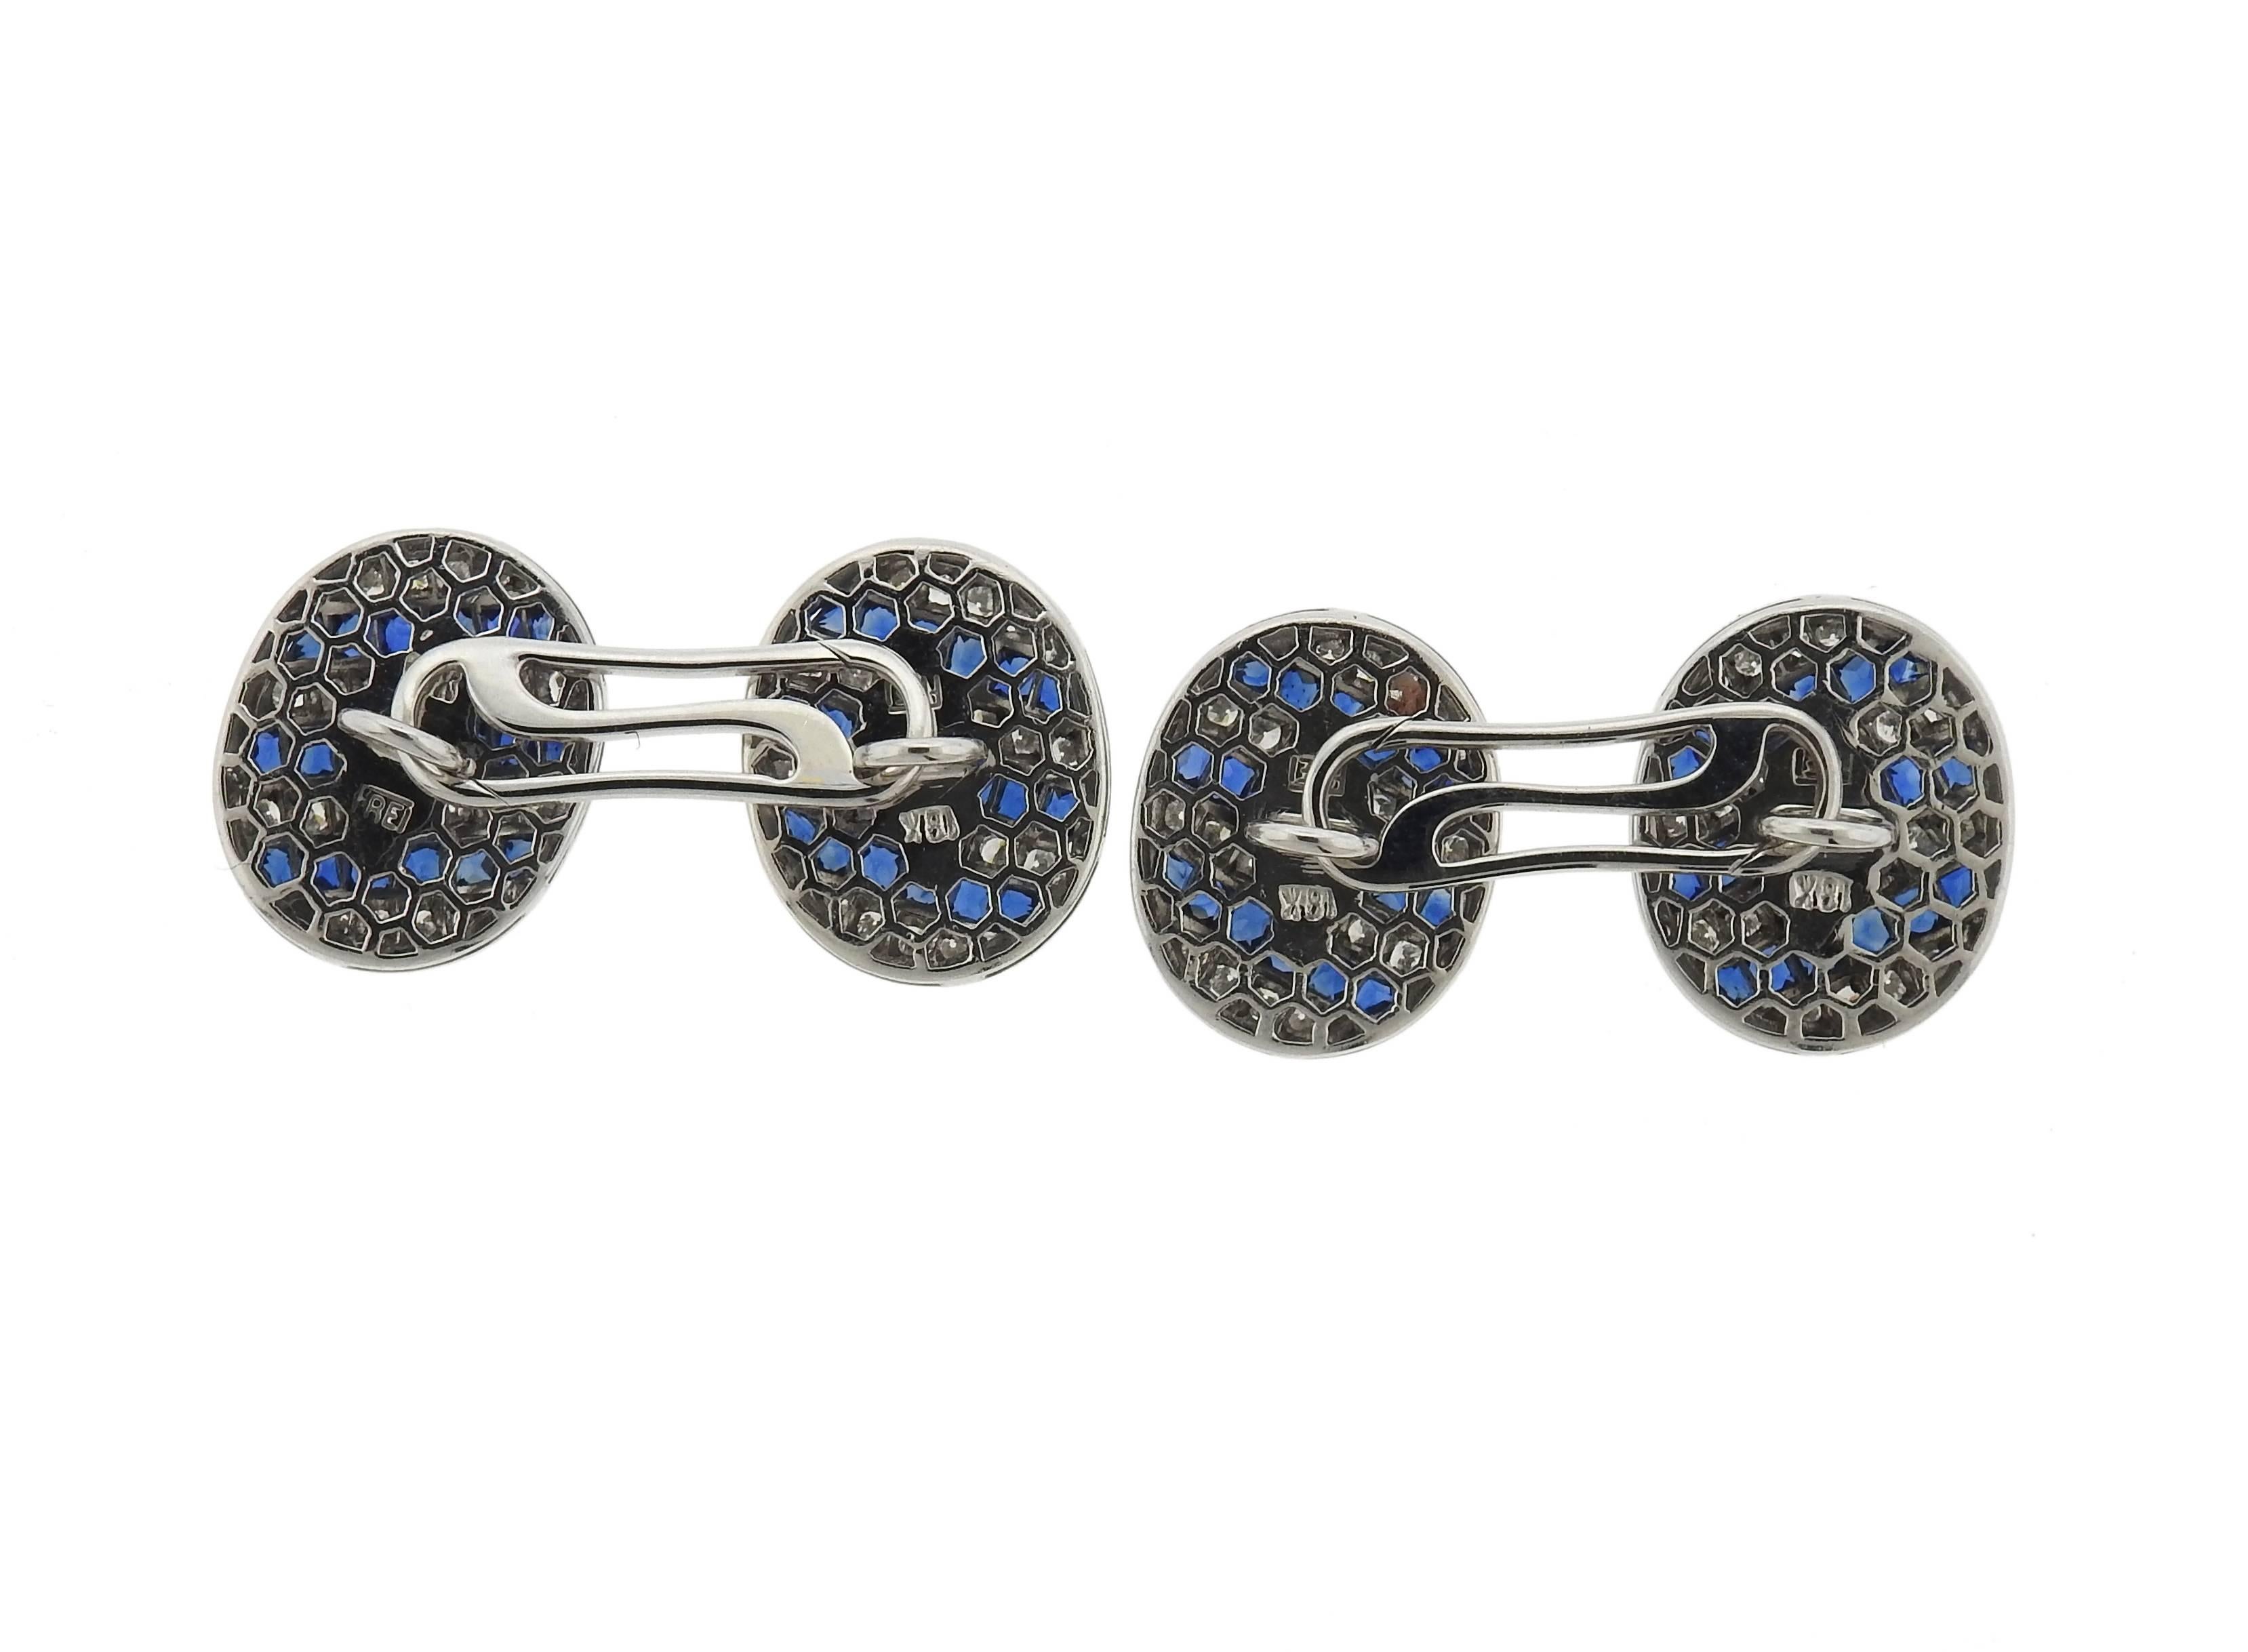 A pair of dressy 18k gold cufflinks, crafted by Eli Frei decorated with French cut sapphires and diamonds. Each top measures 16mm x 13mm . Marked: 18k FREI. Weight - 13.1 grams 